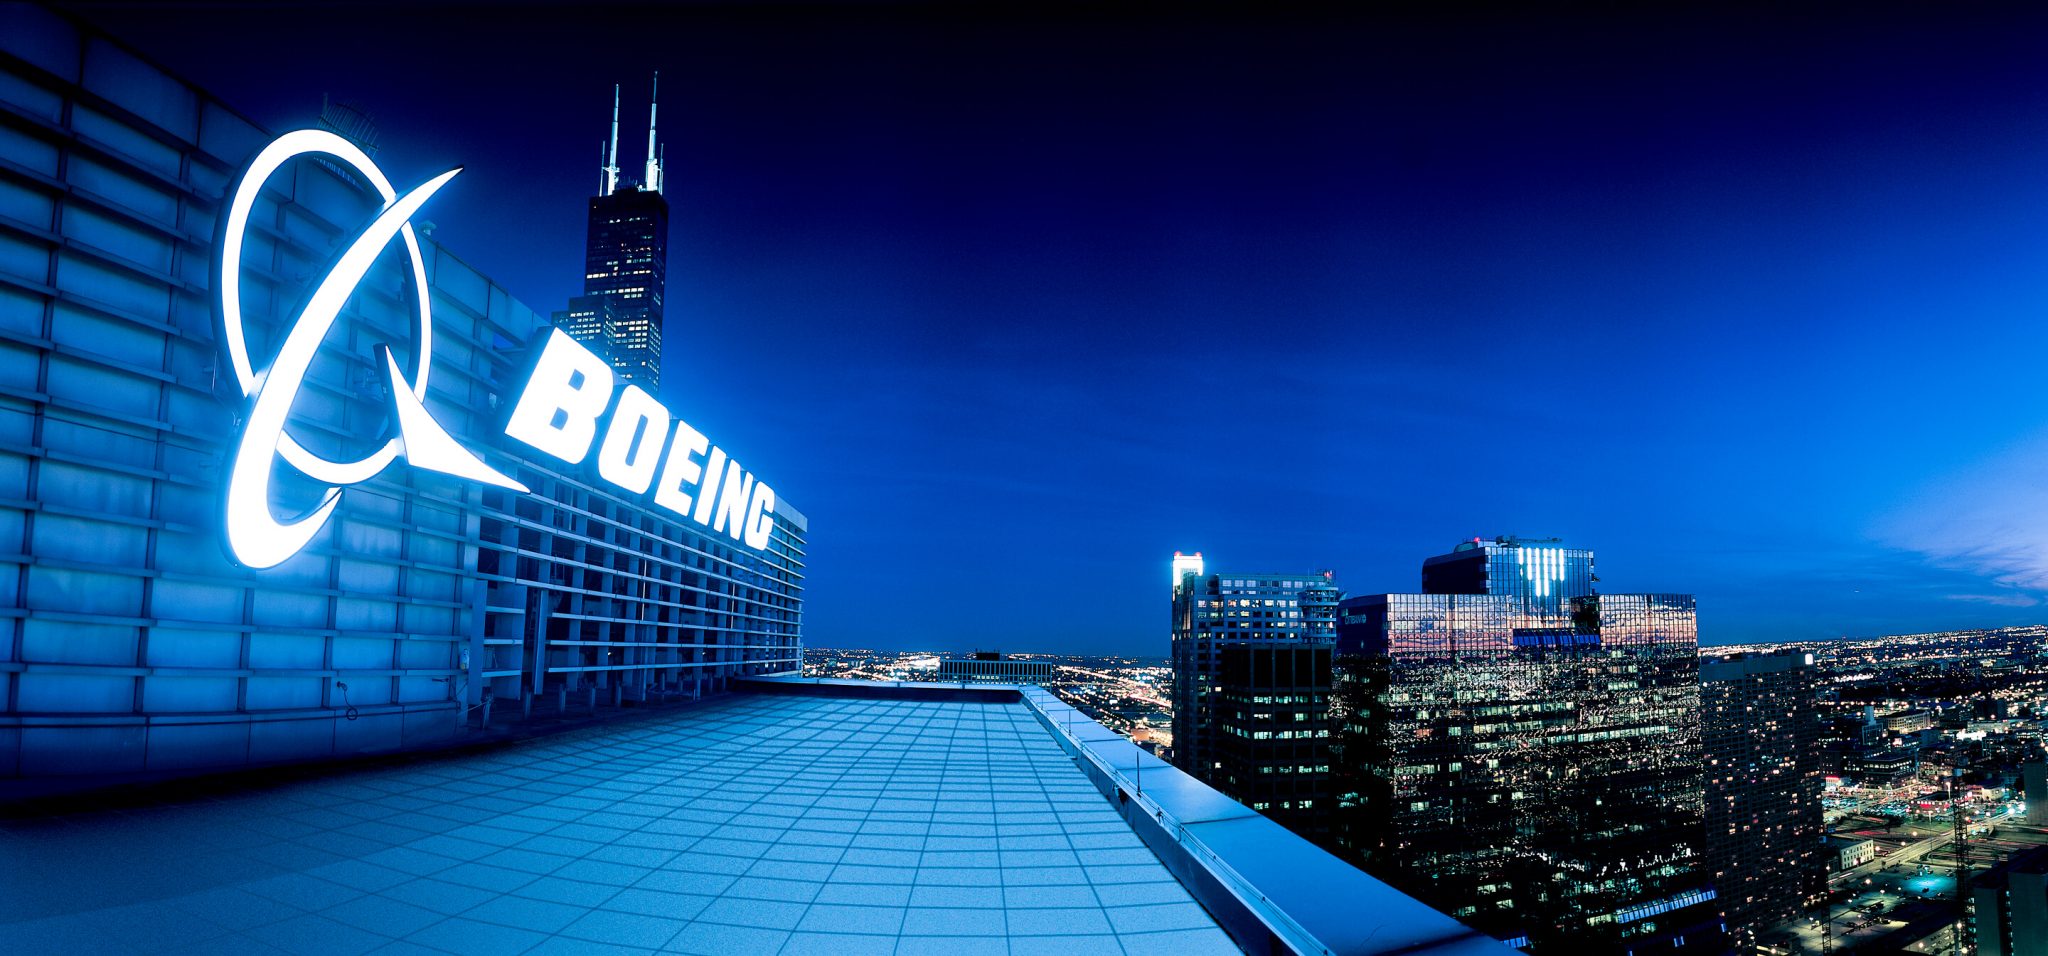 Boeing forecasts $1.5 trillion demand Southeast Asia over the next 20 years